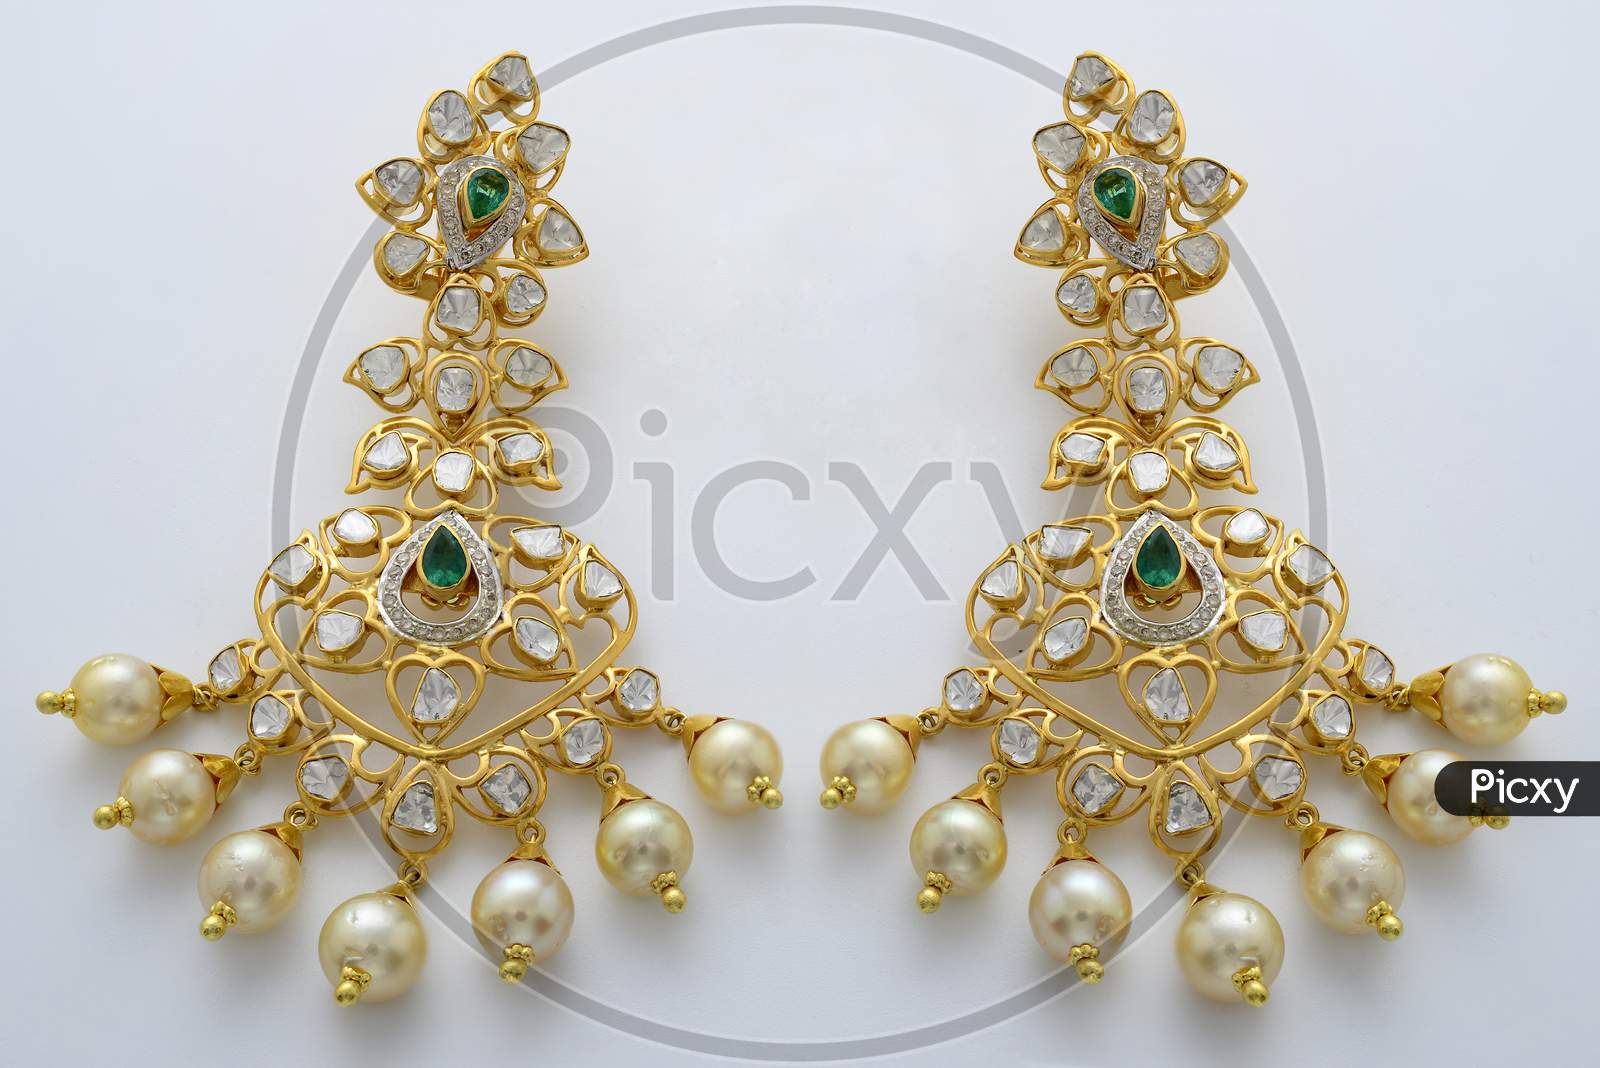 Gold coated earrings with gemstones